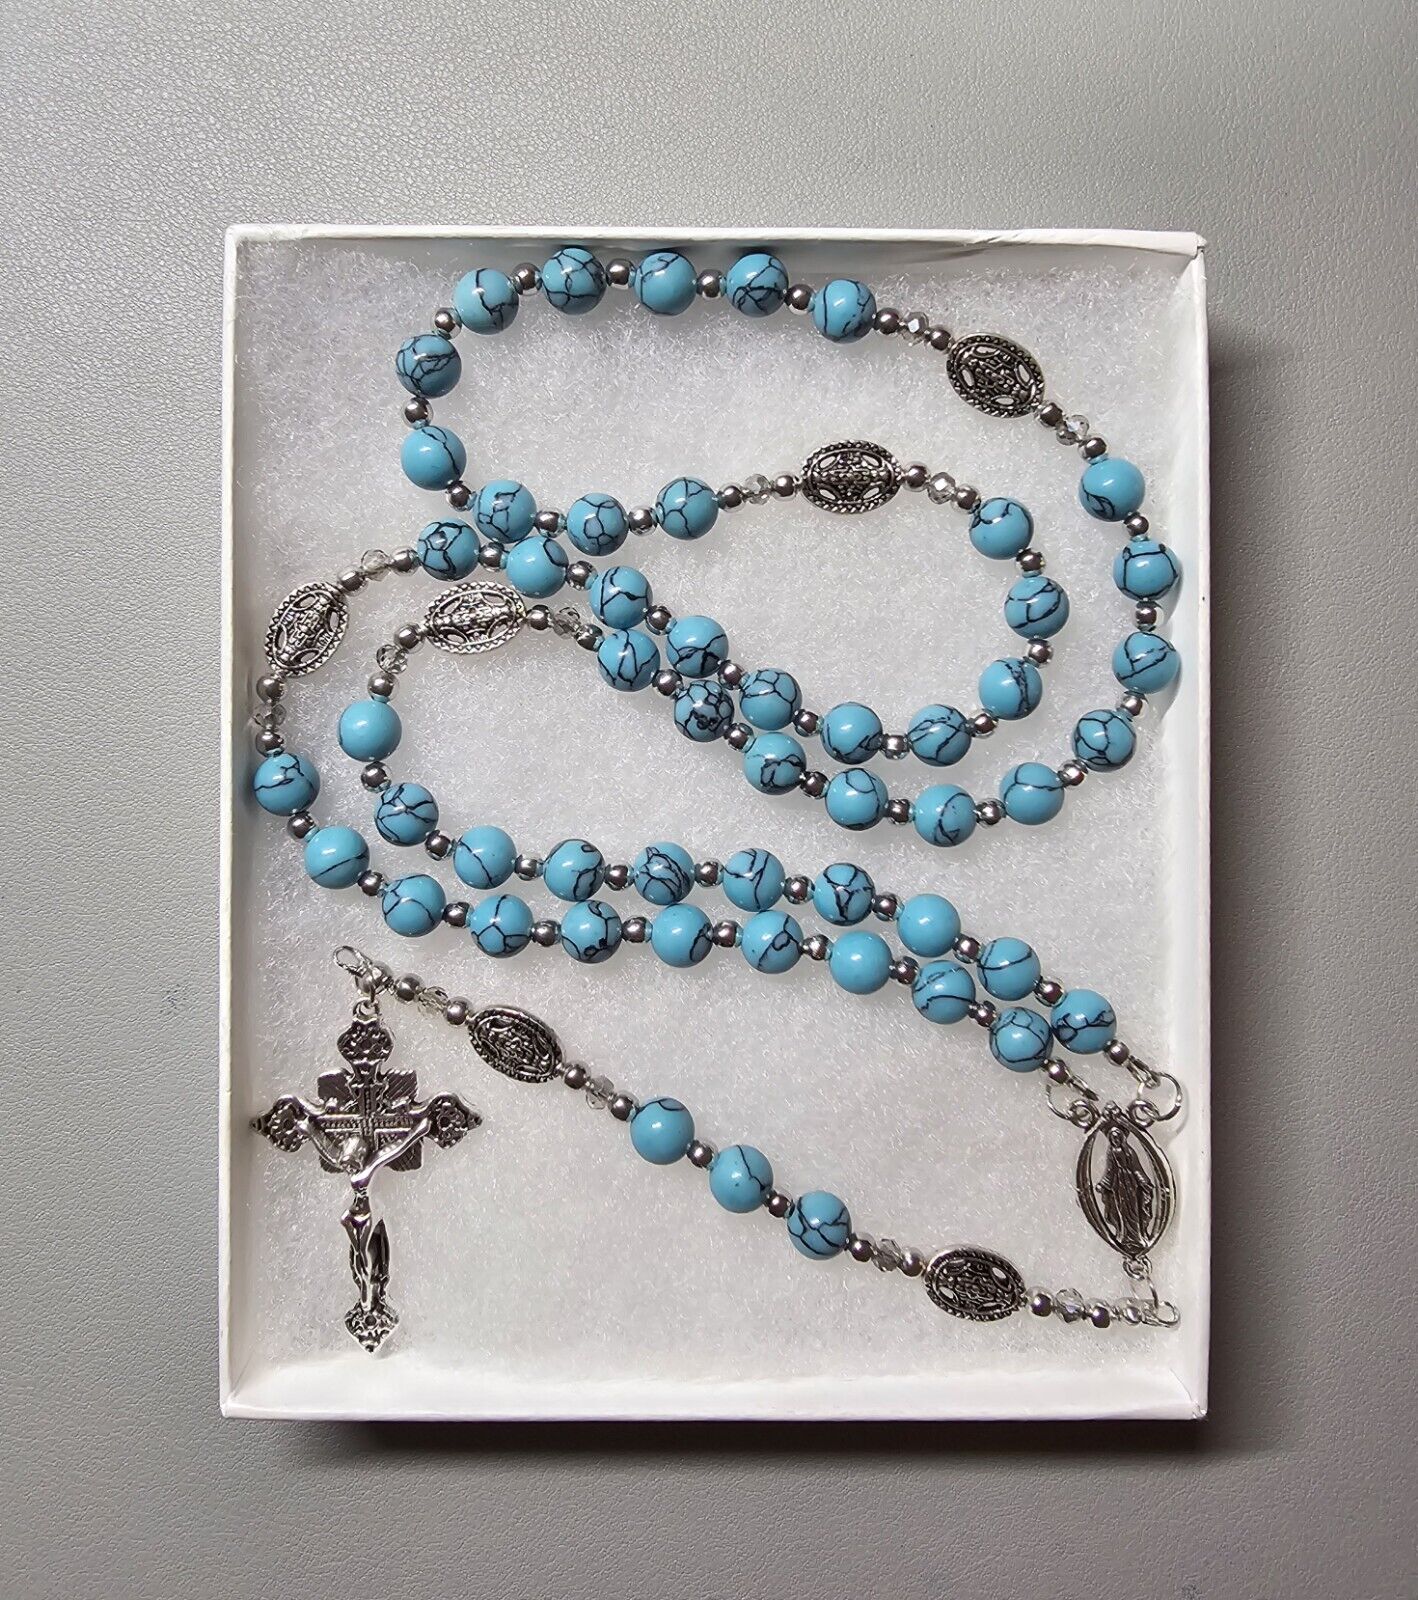 Large One Of A Kind Hand Crafted Rosary Made With Turquoise Stone Beads